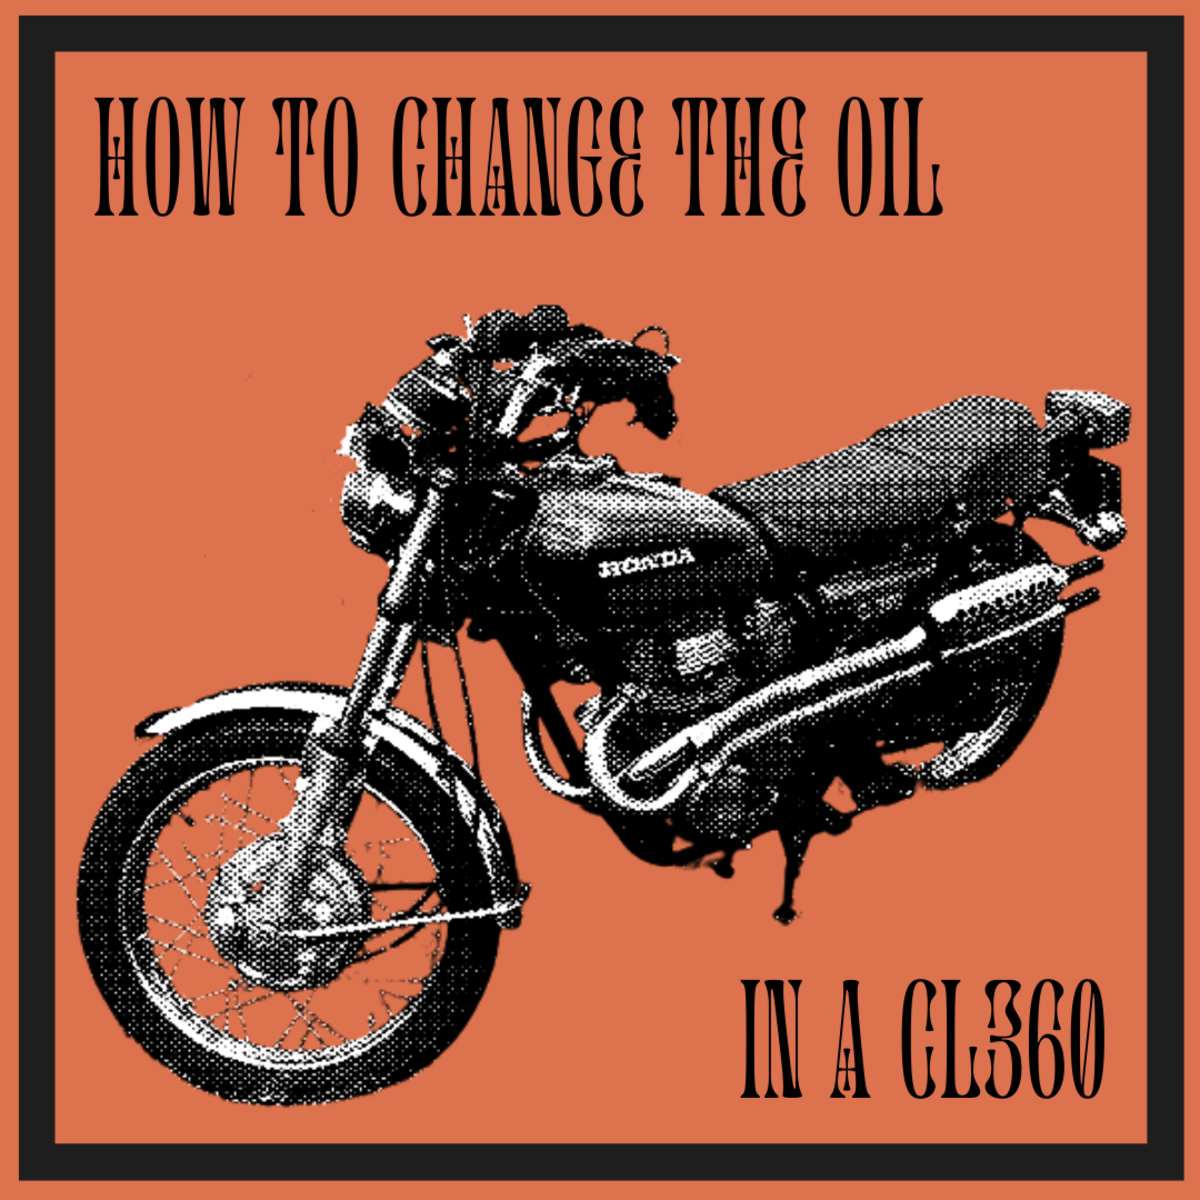 How to Change the Oil in Your CL360